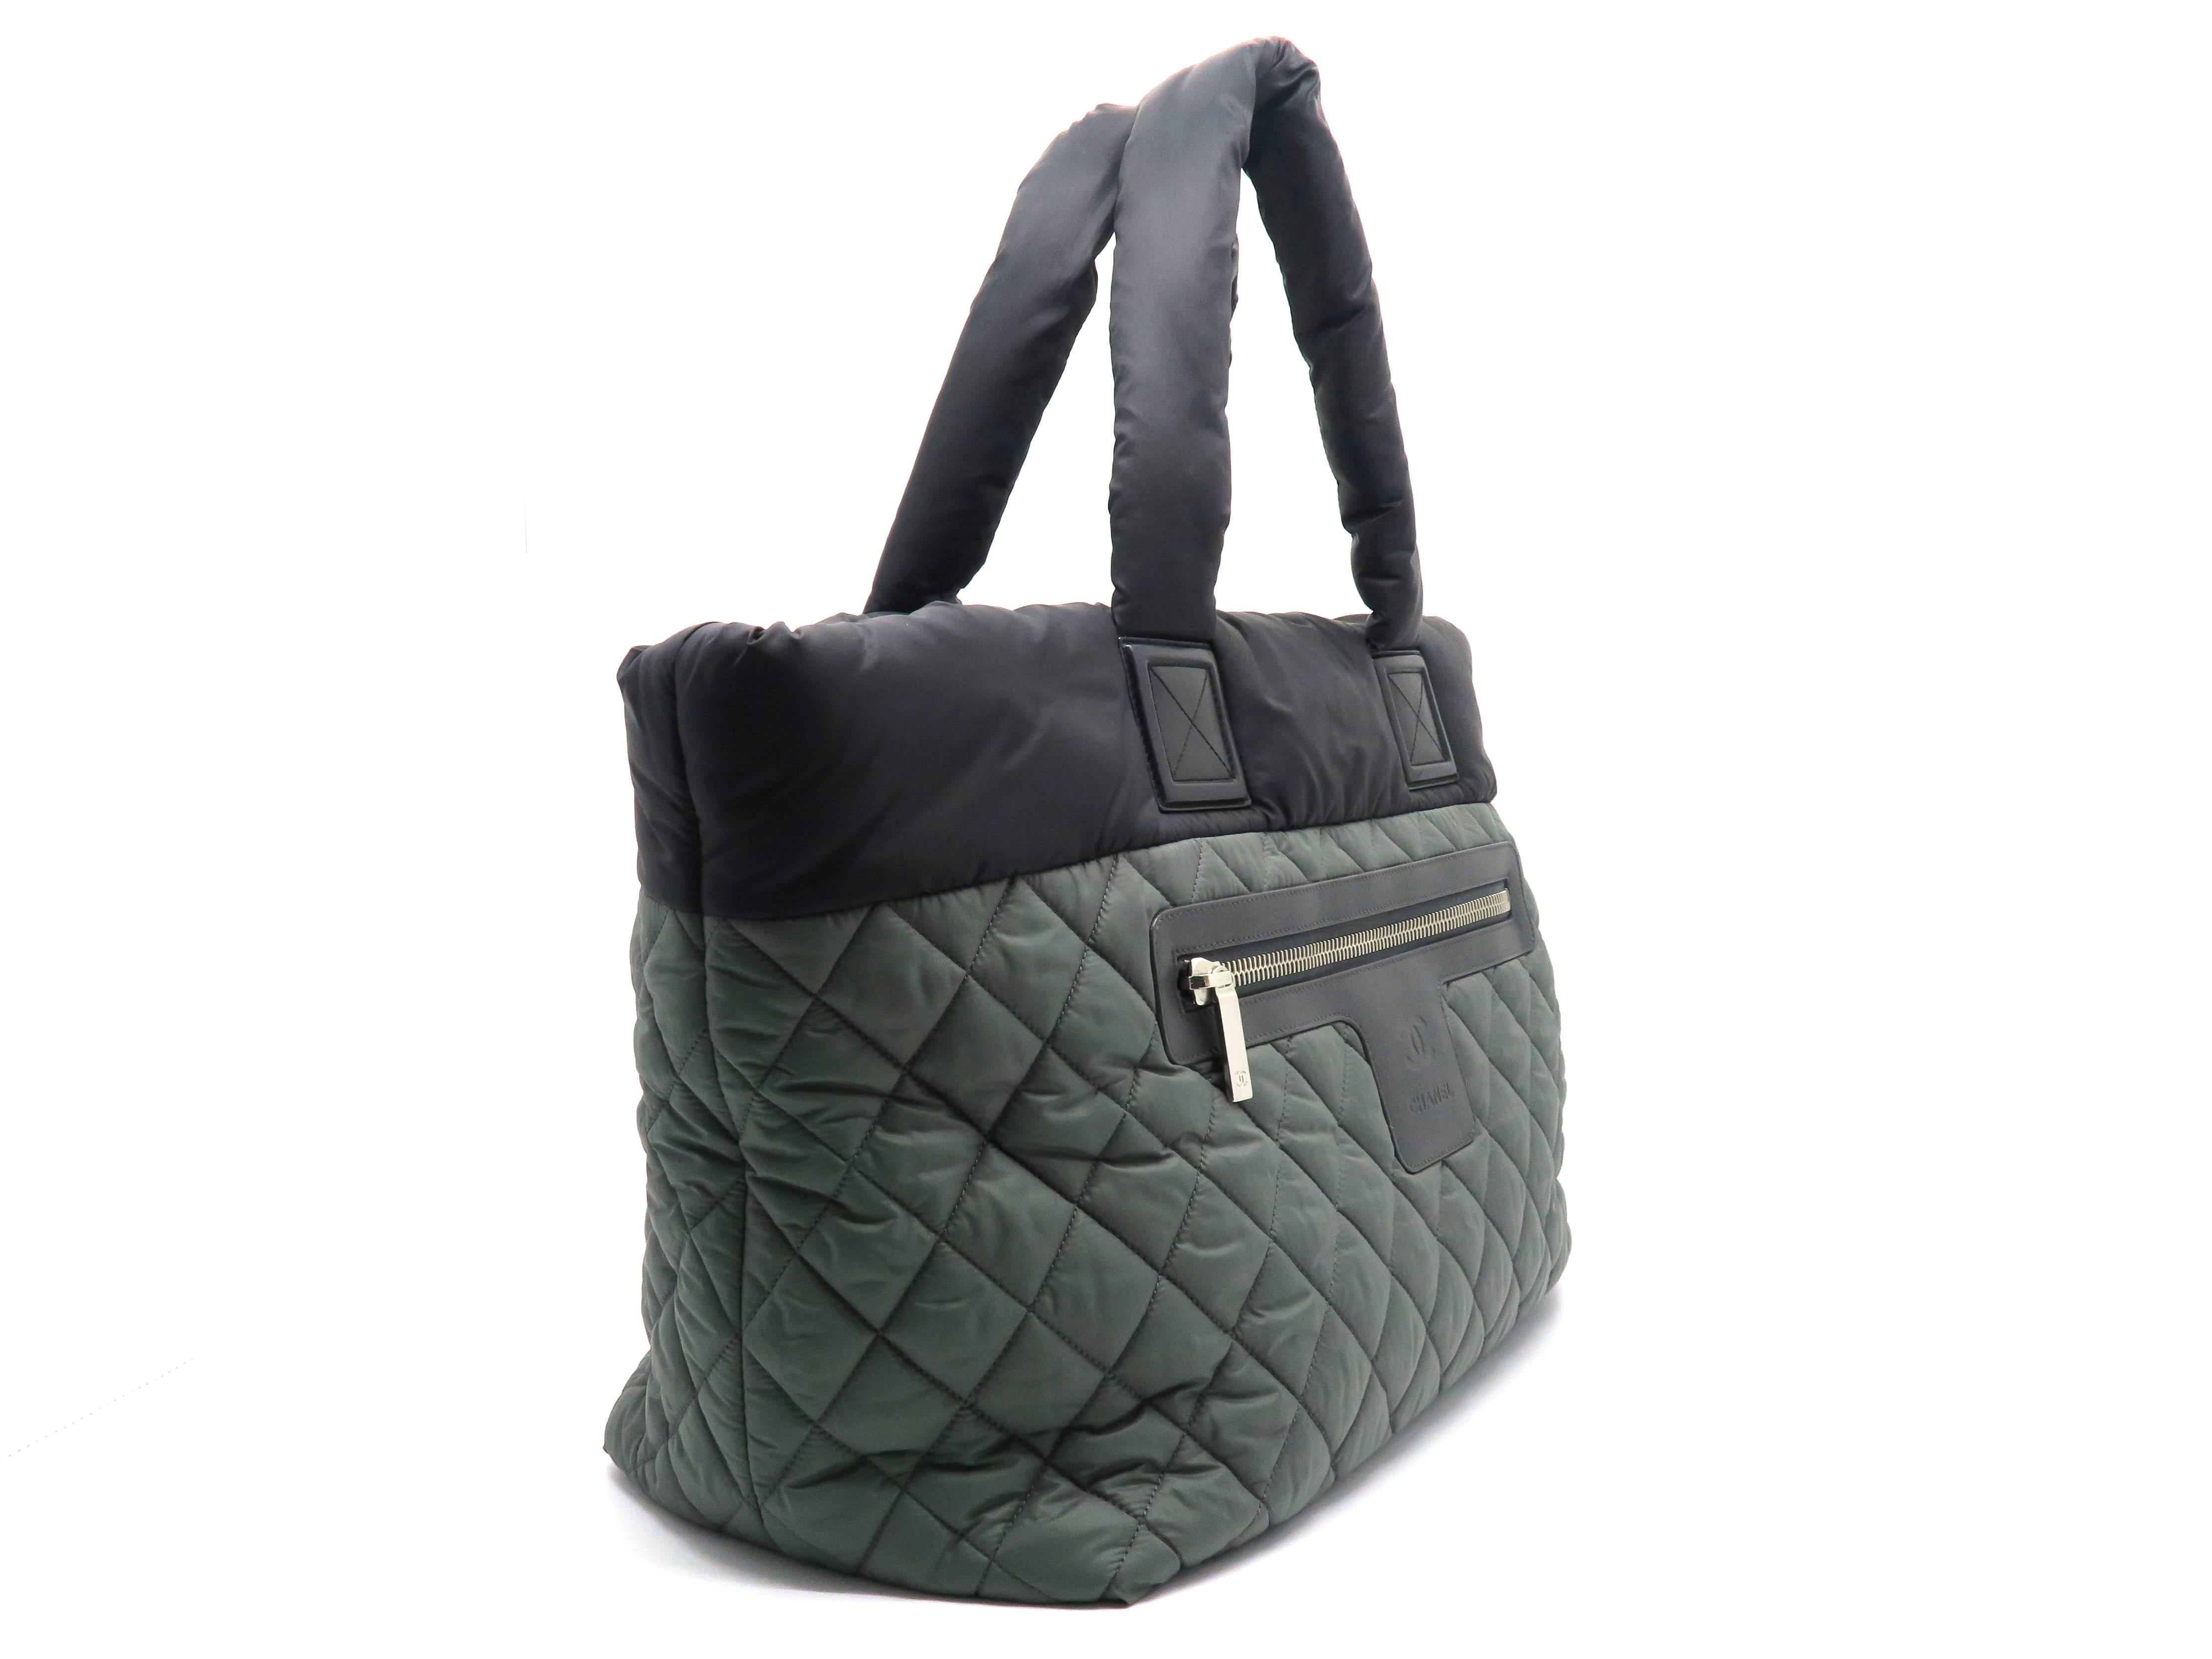 Color: Green/ Black
Material: Nylon

Condition: Rank A
Overall: Good, minor defects
Surface: Good
Corners : Good 
Edges: Good 
Handles/Straps: Minor Stains 
Hardware: Minor Scratches 

Dimension: W39 × H30 × D18cm（W15.3" × H11.8" ×